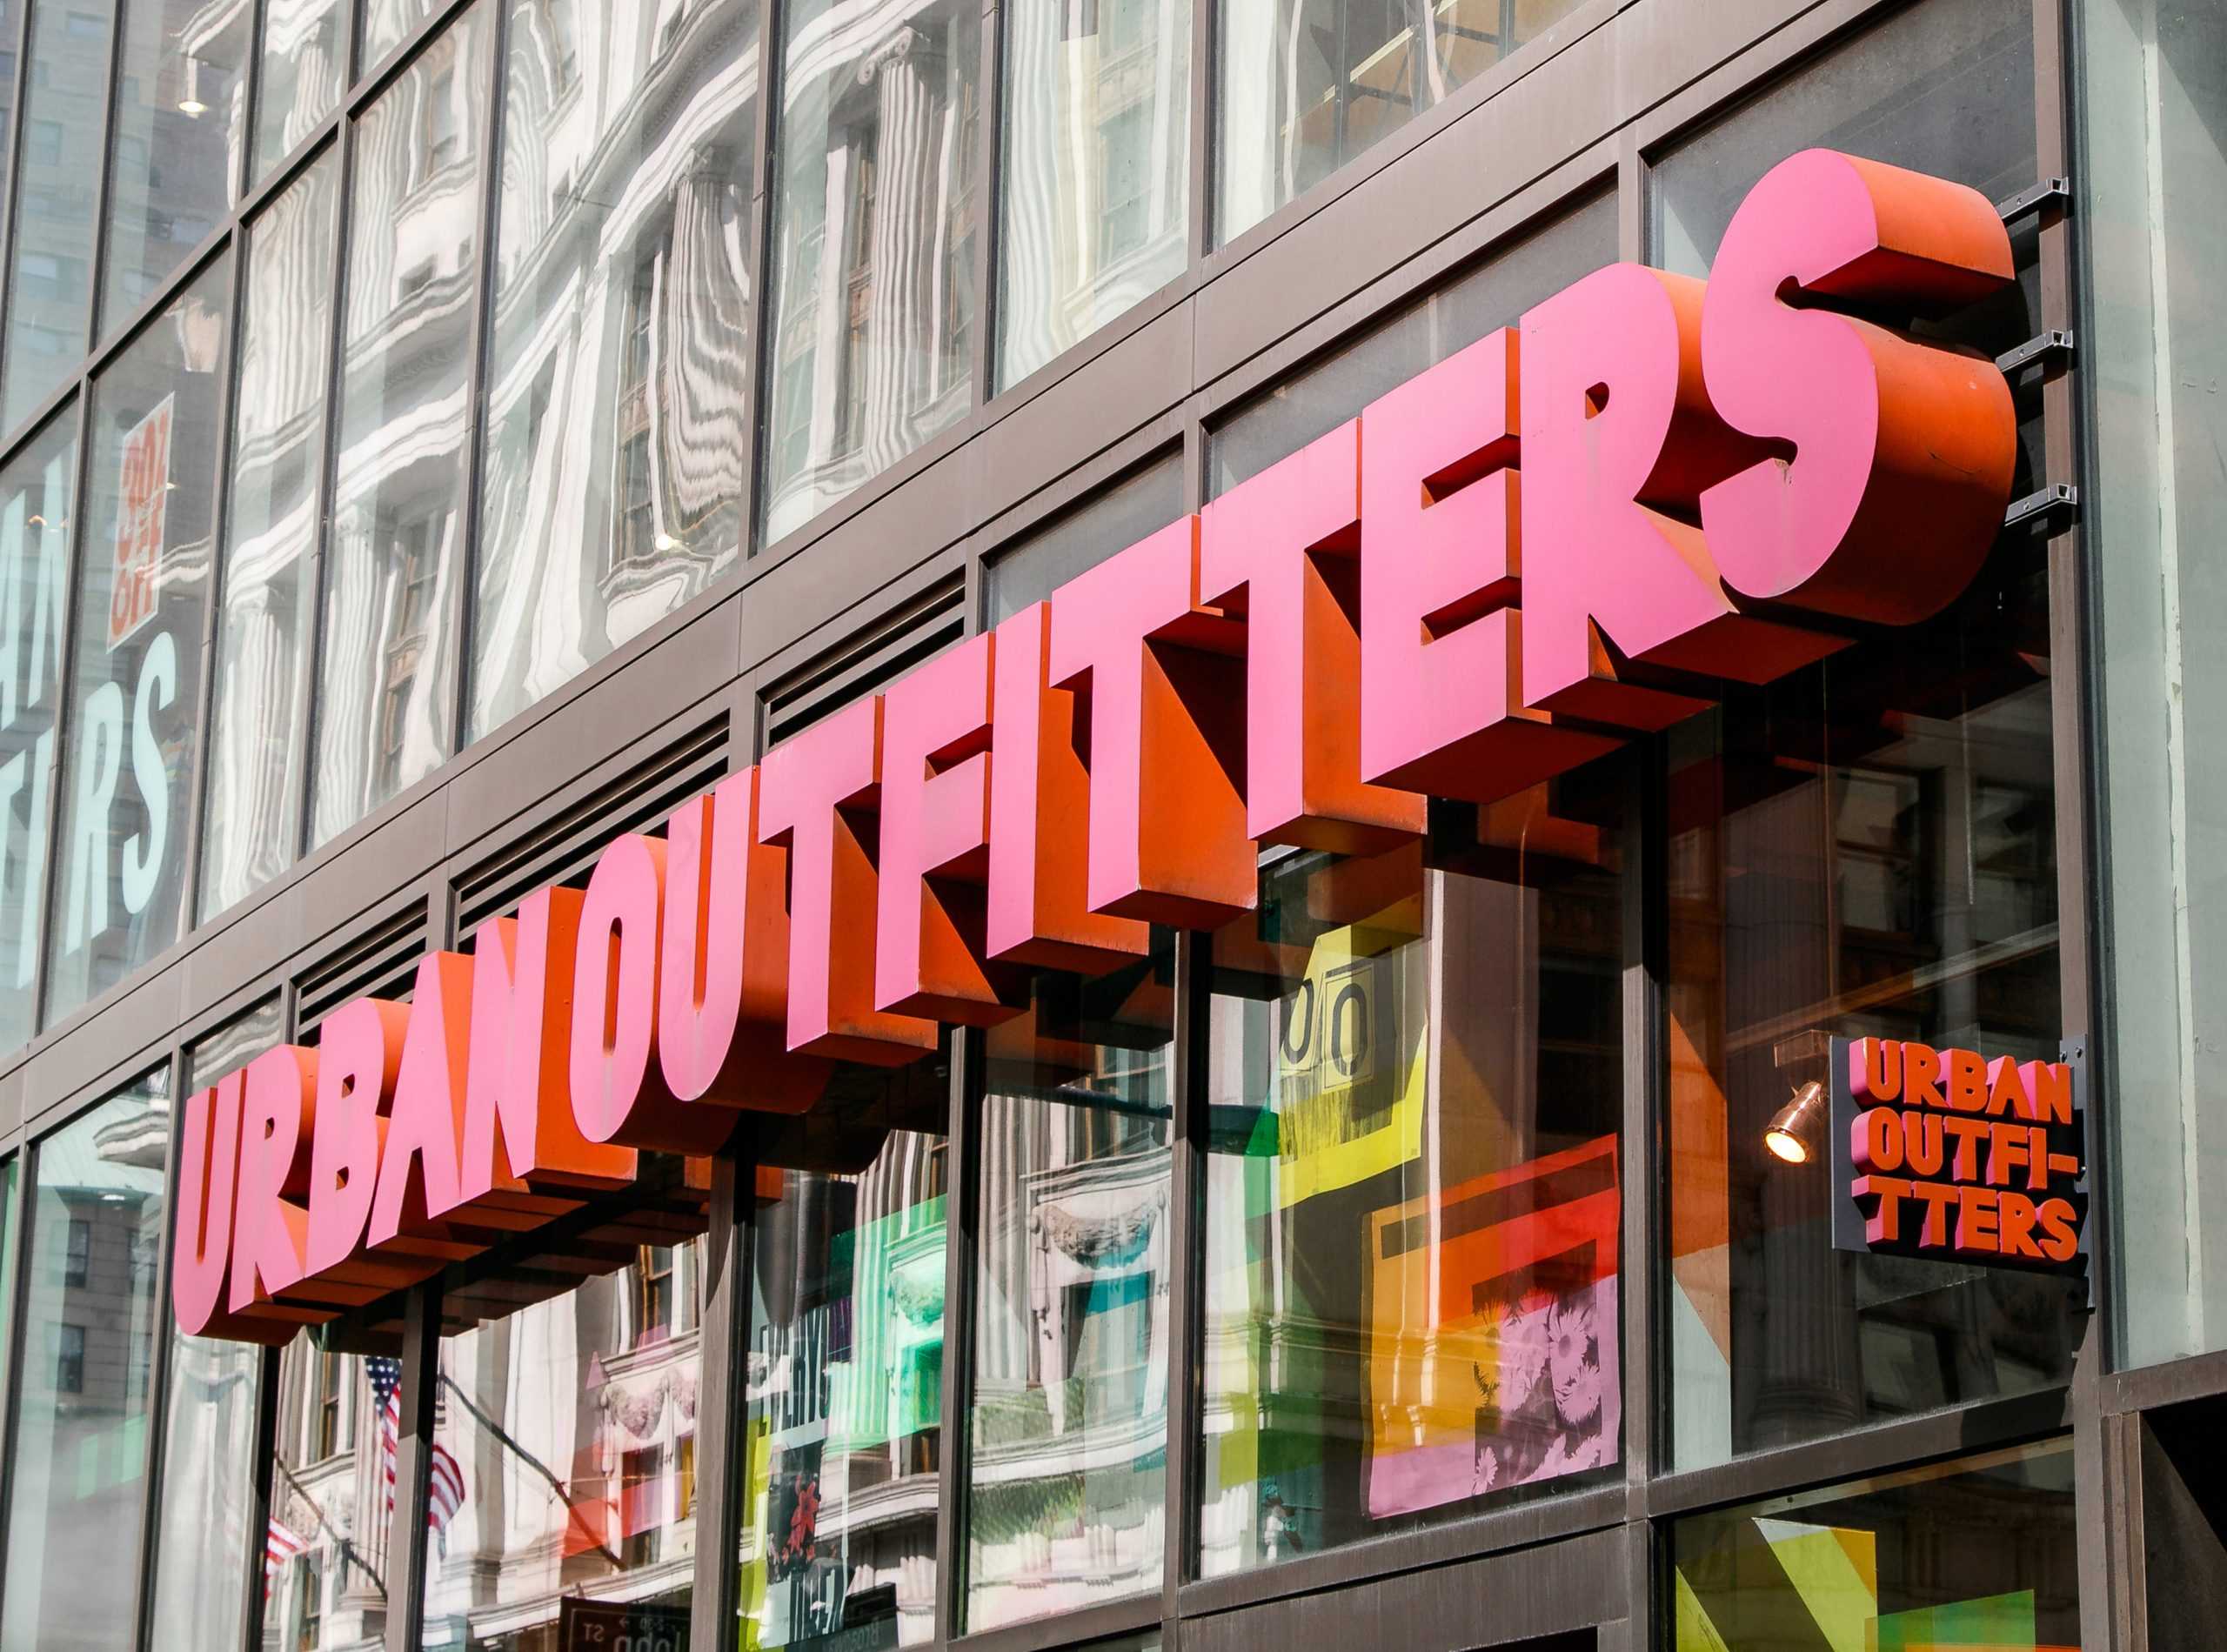 New Urban Outfitters subscription service will let you rent latest styles for $88 a month. (Dreamstime/TNS)